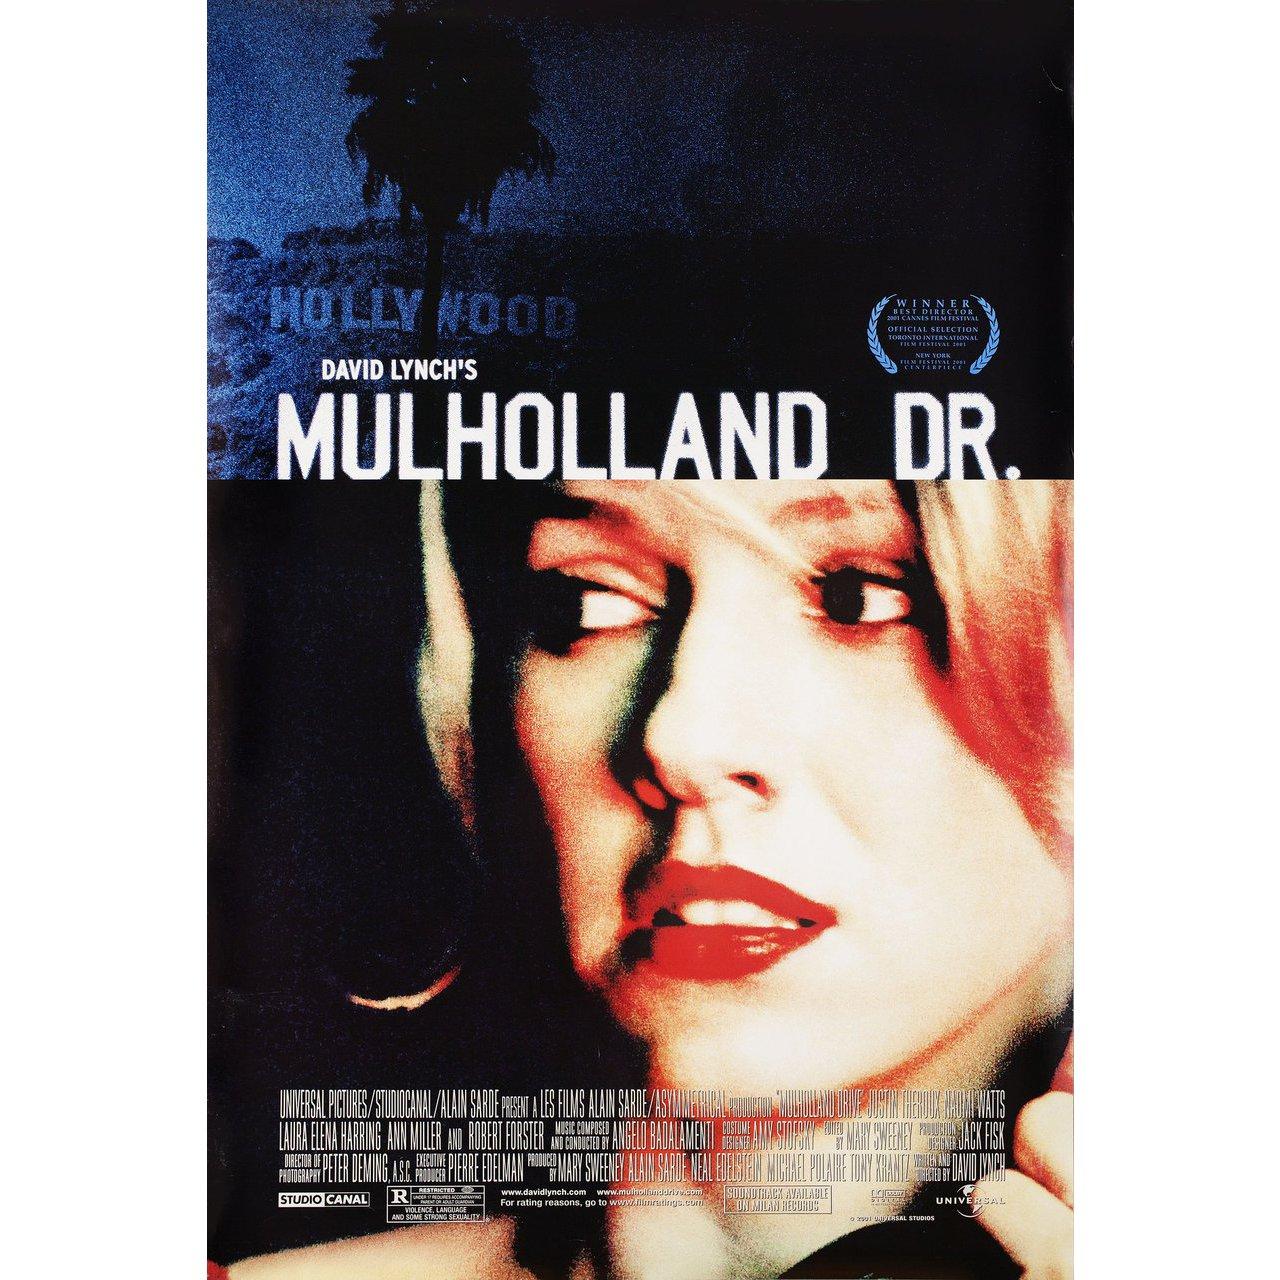 Original 2001 U.S. one sheet poster for the film Mulholland Drive directed by David Lynch with Naomi Watts / Laura Harring / Ann Miller / Dan Hedaya. Very good-fine condition, rolled. Please note: the size is stated in inches and the actual size can